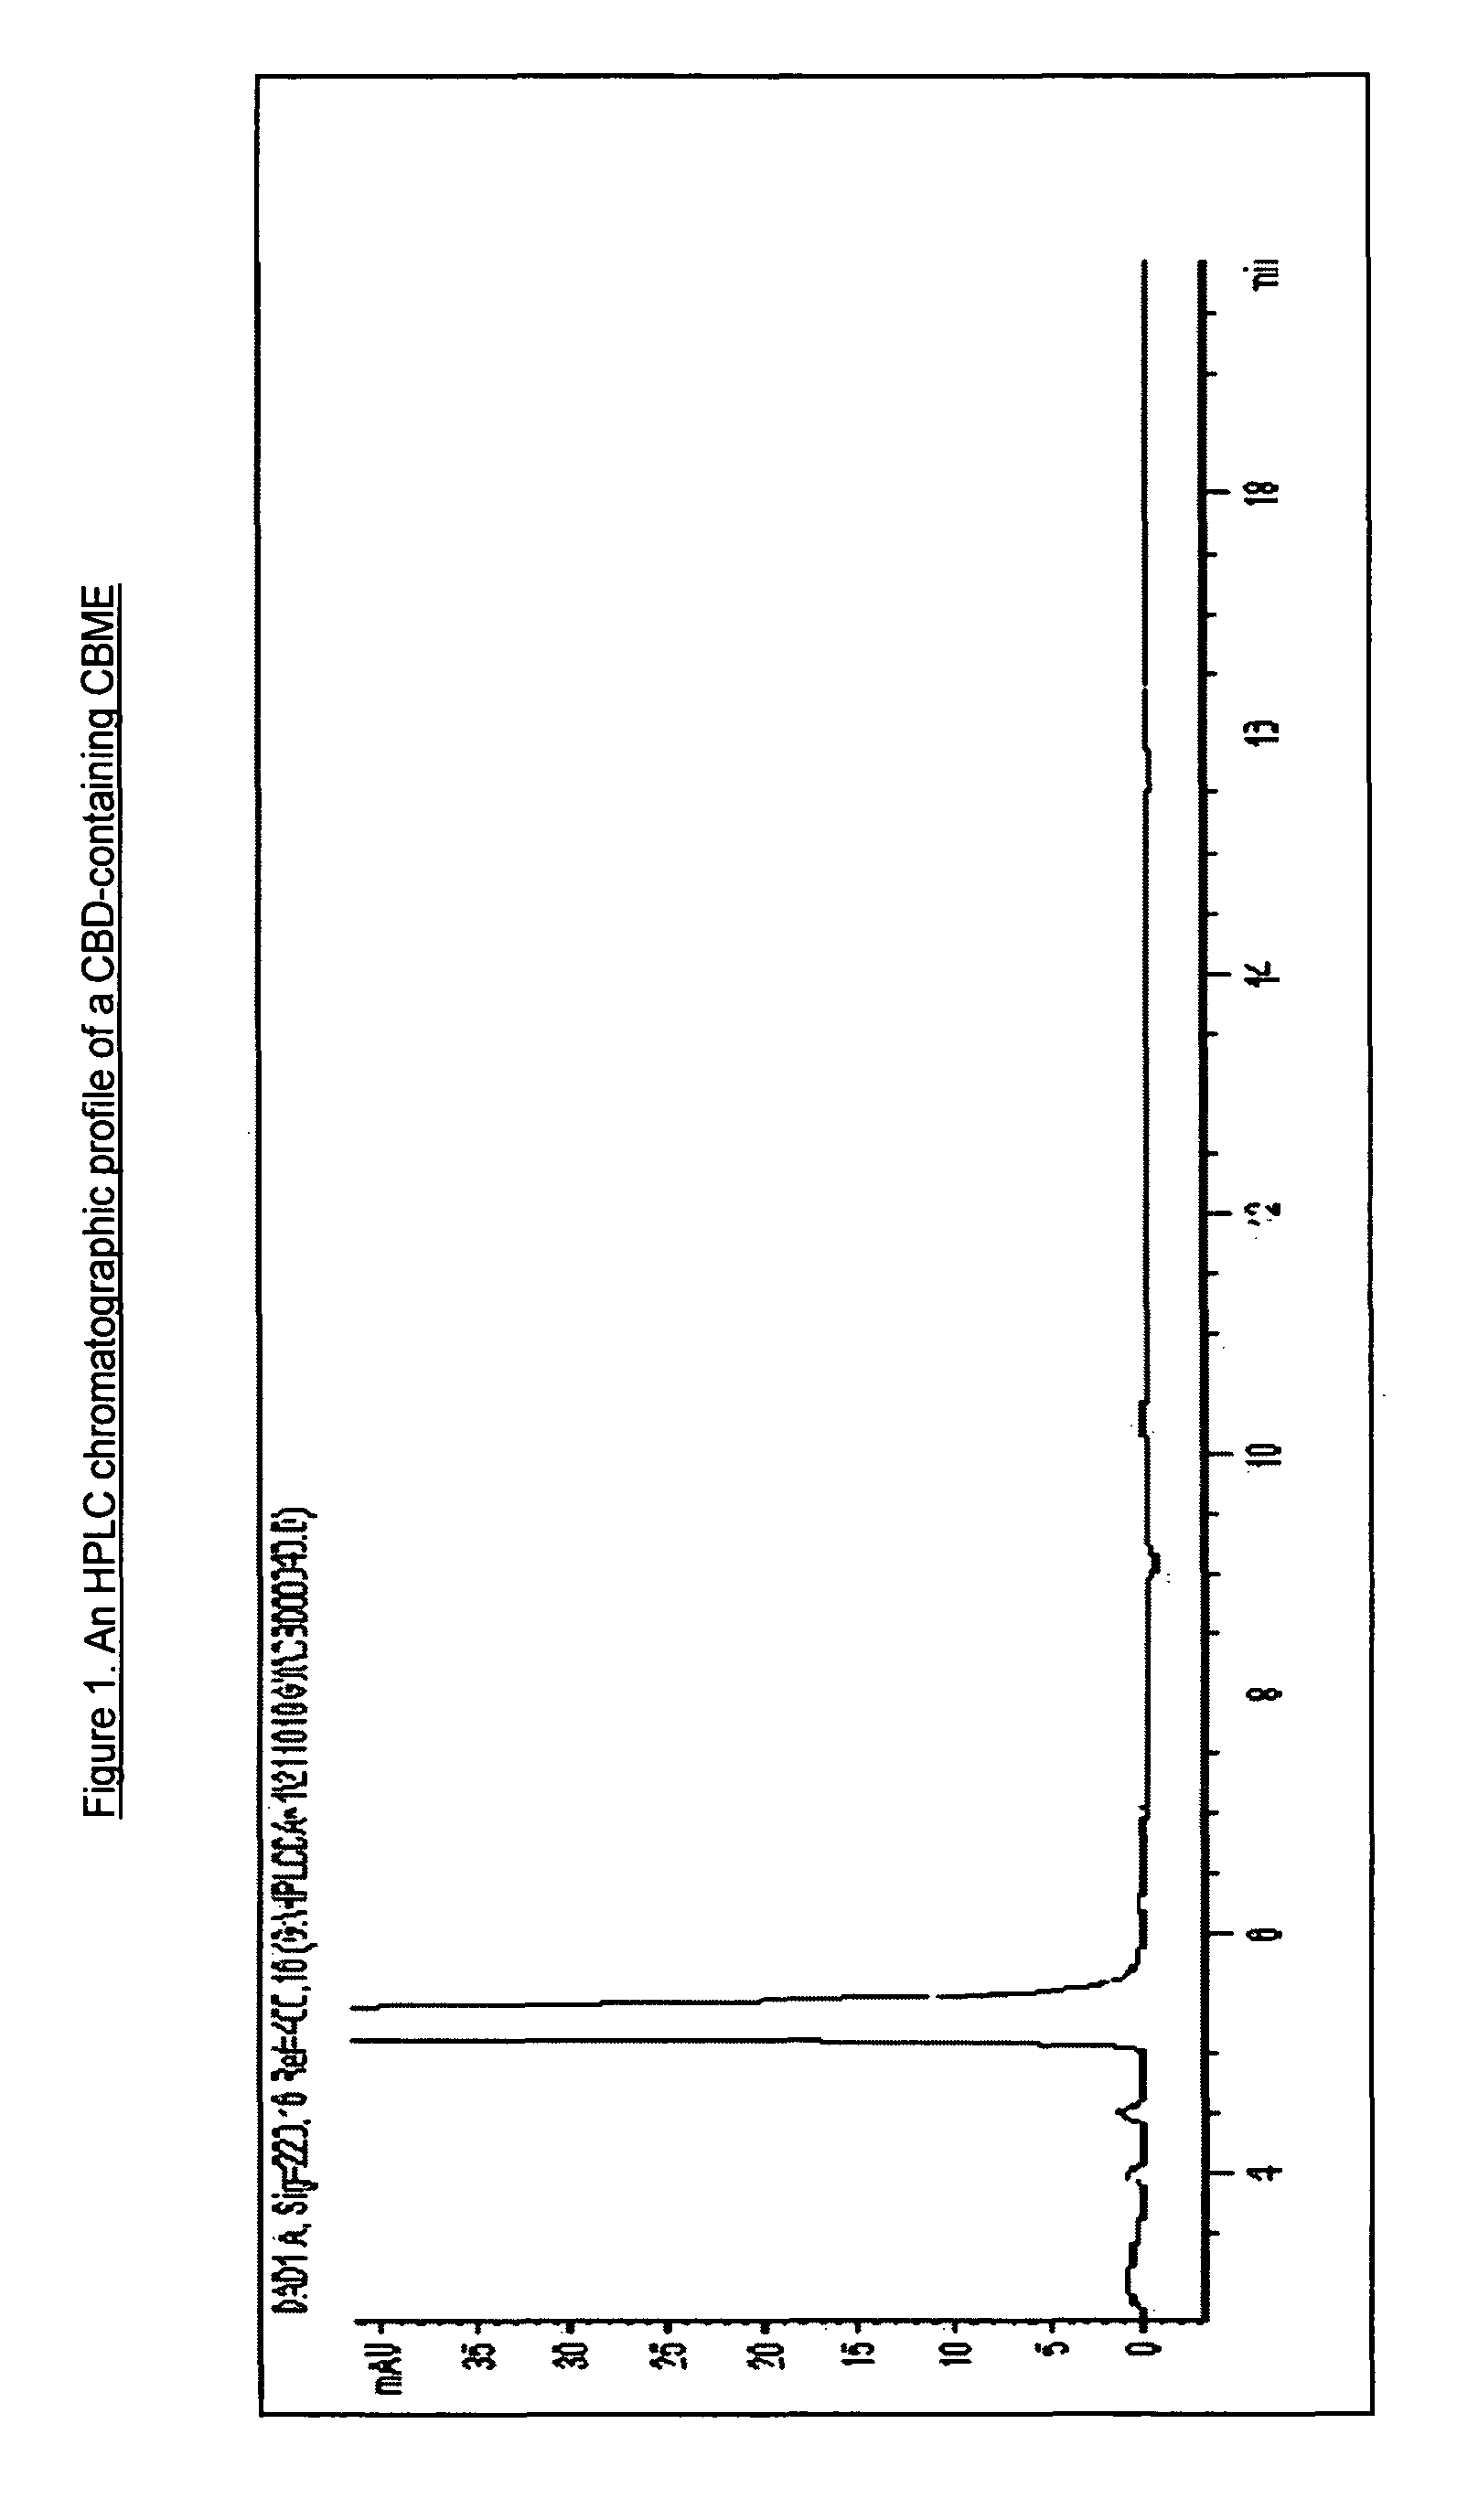 Pharmaceutical compositions for the treatment of pain